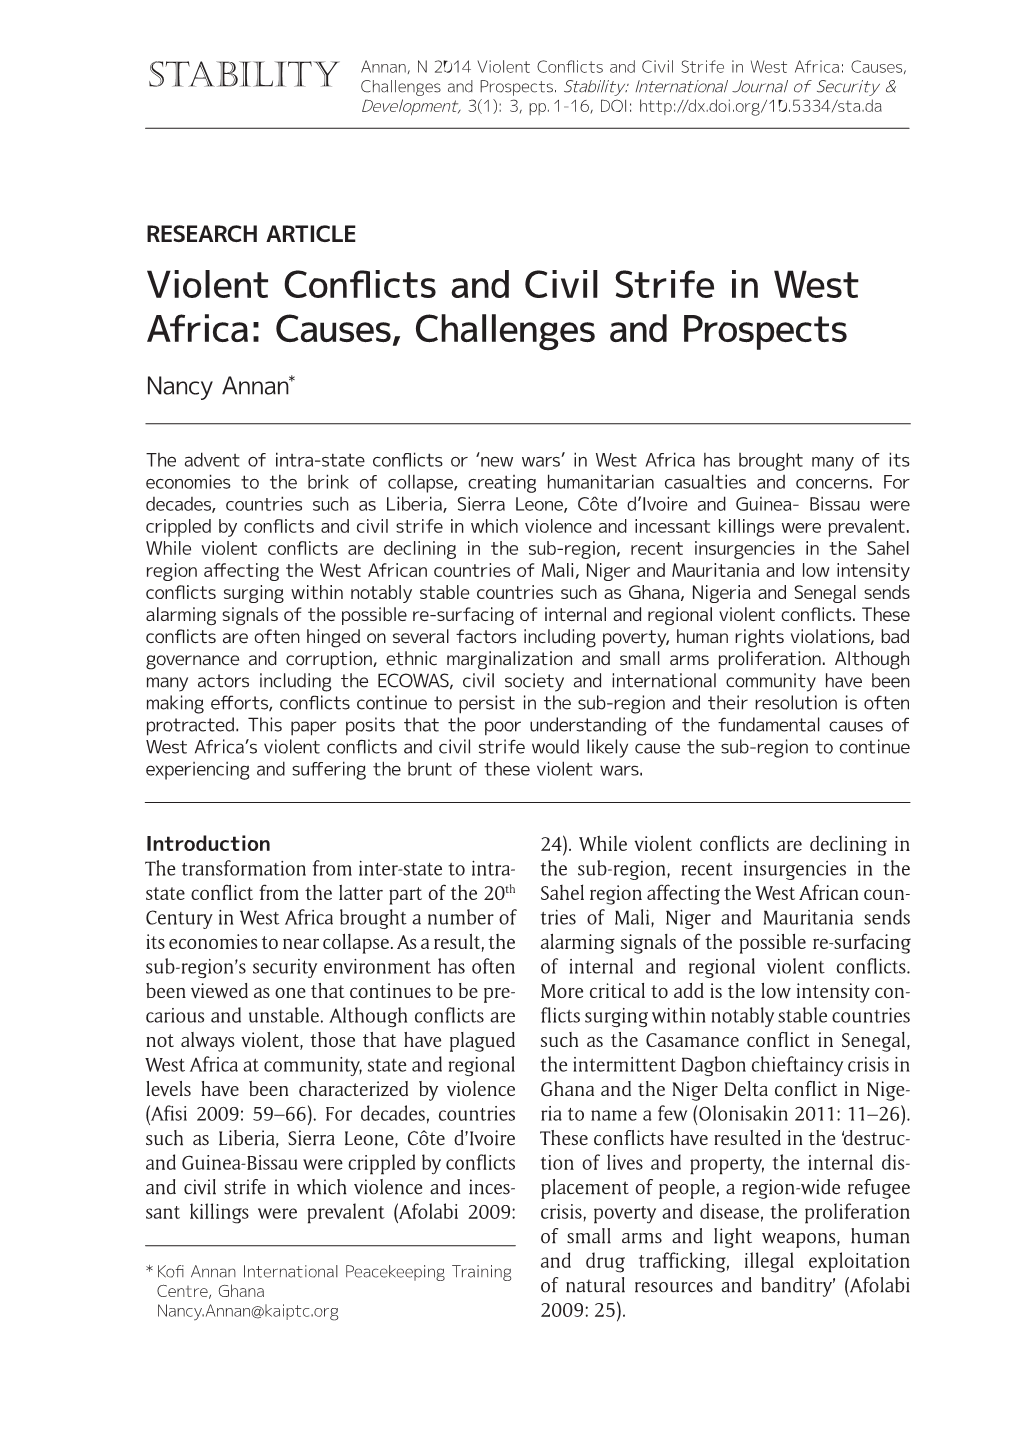 Violent Conflicts and Civil Strife in West Africa: Causes, Stability Challenges and Prospects